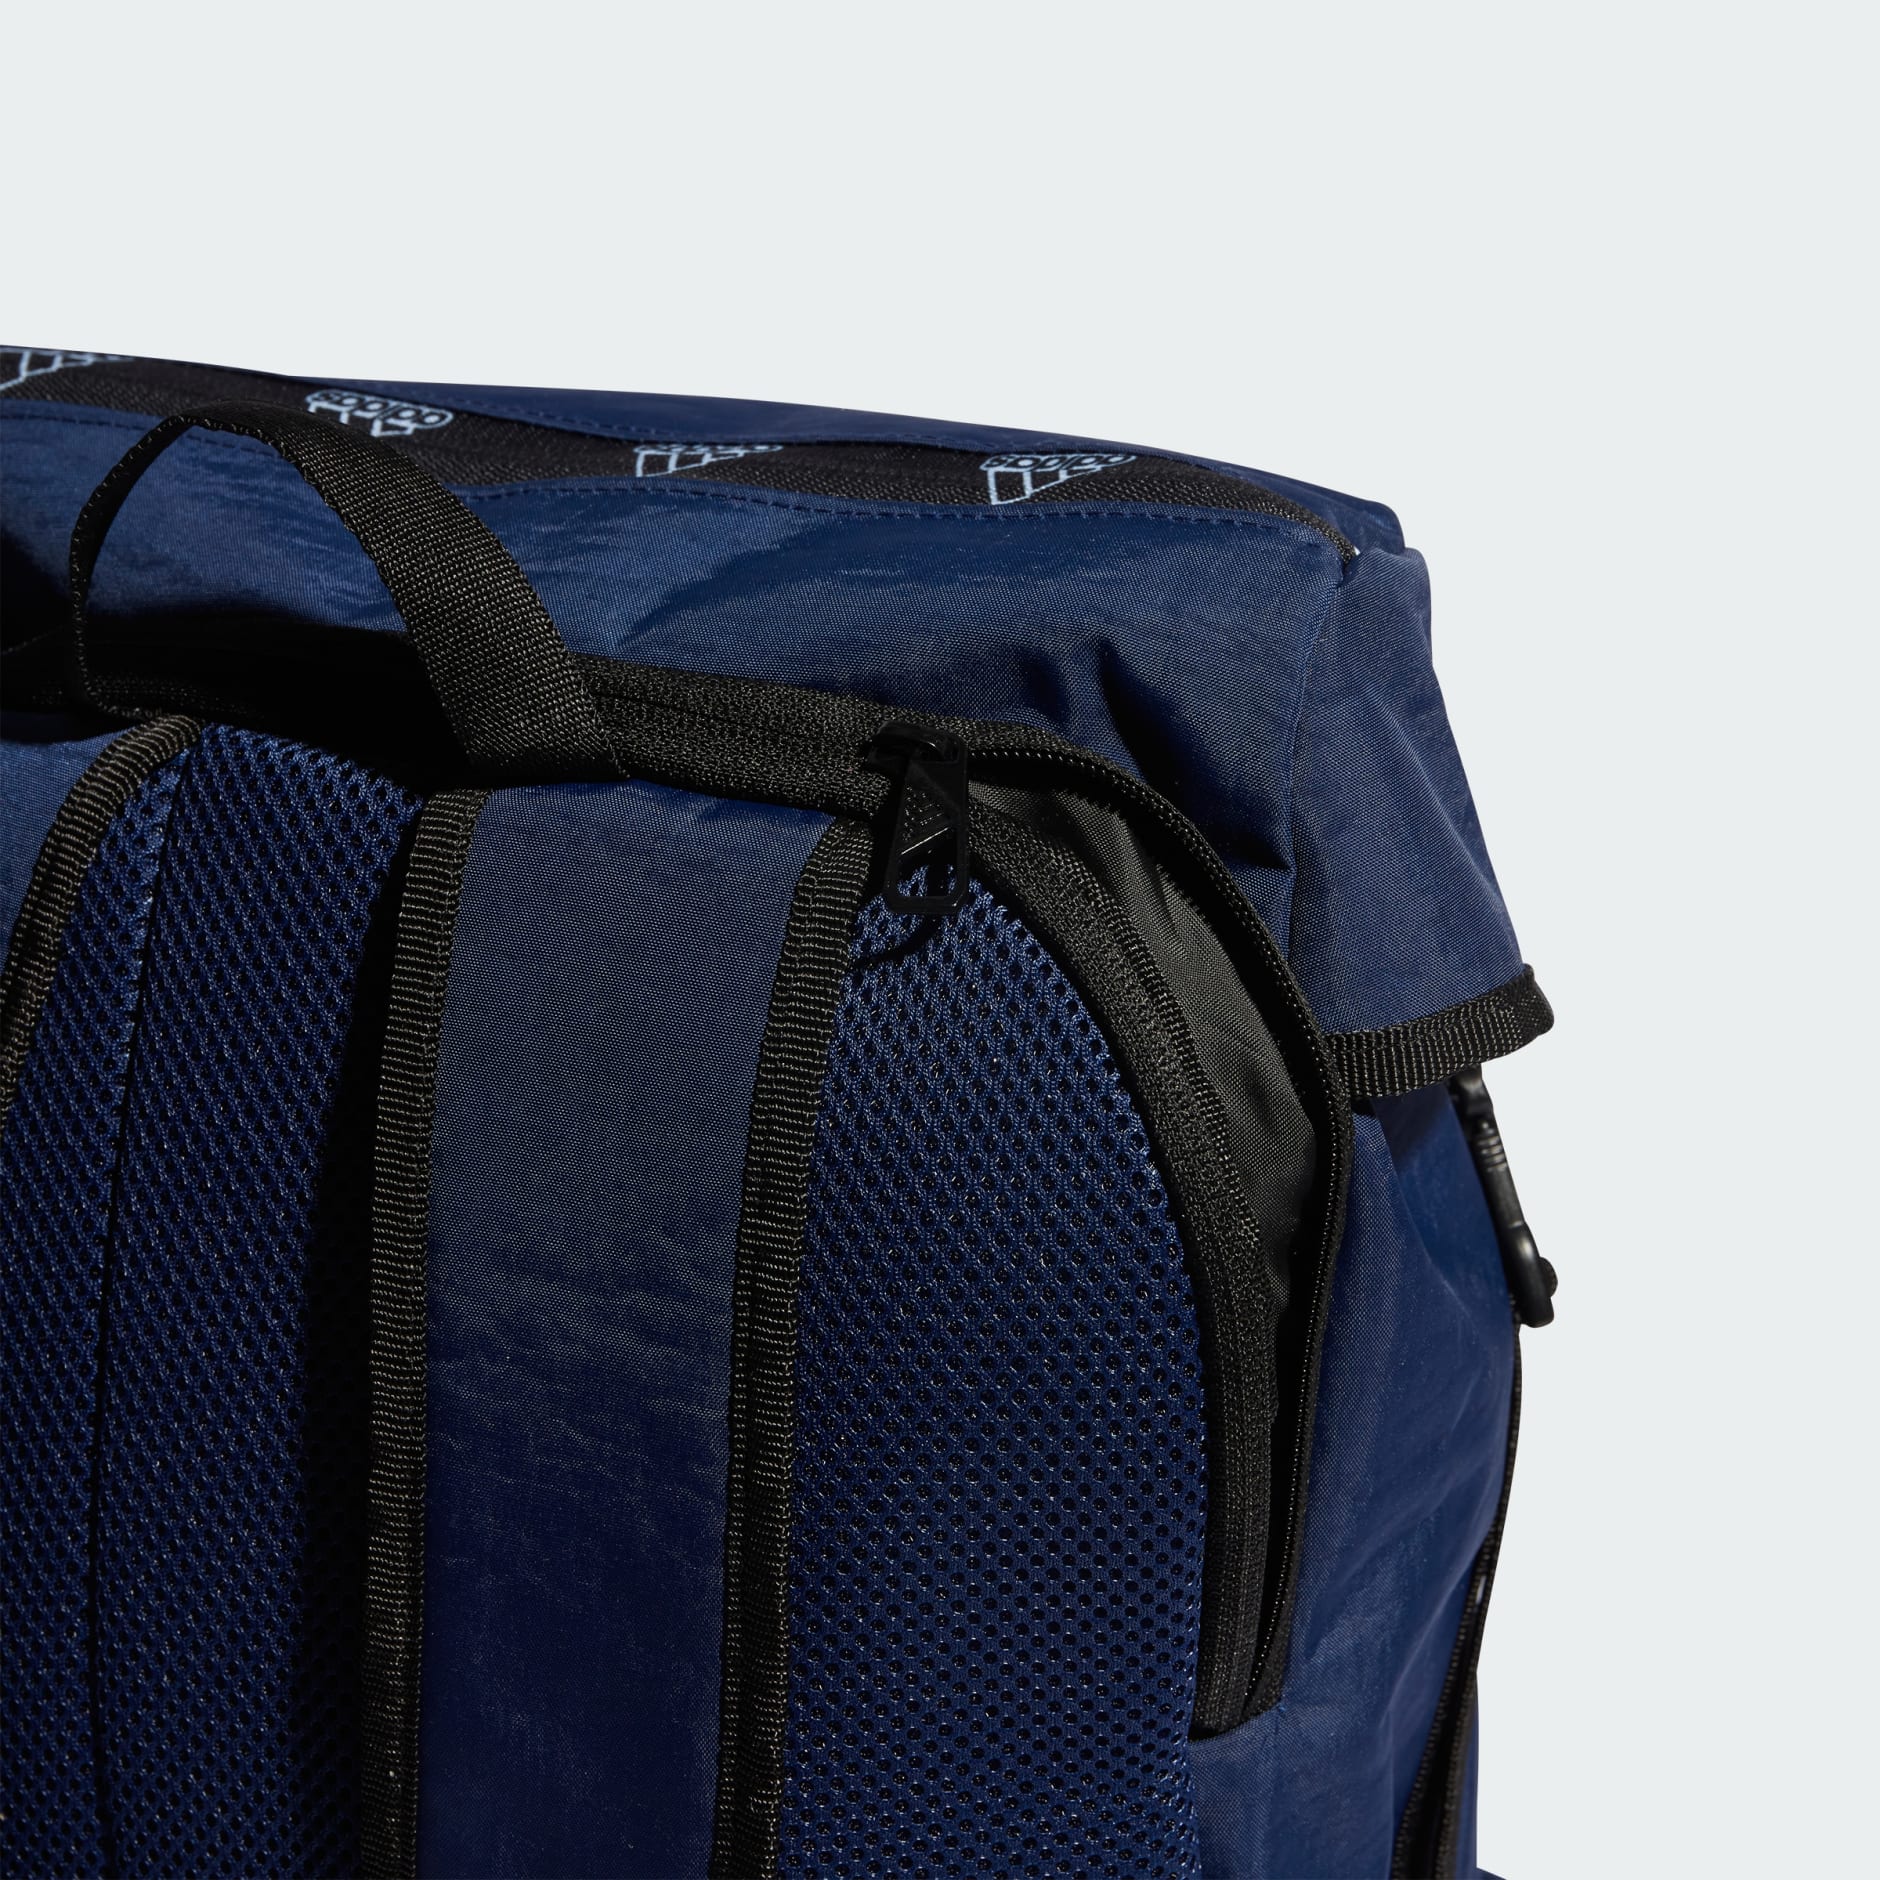 Accessories - 4ATHLTS Camper Backpack - Blue | adidas South Africa